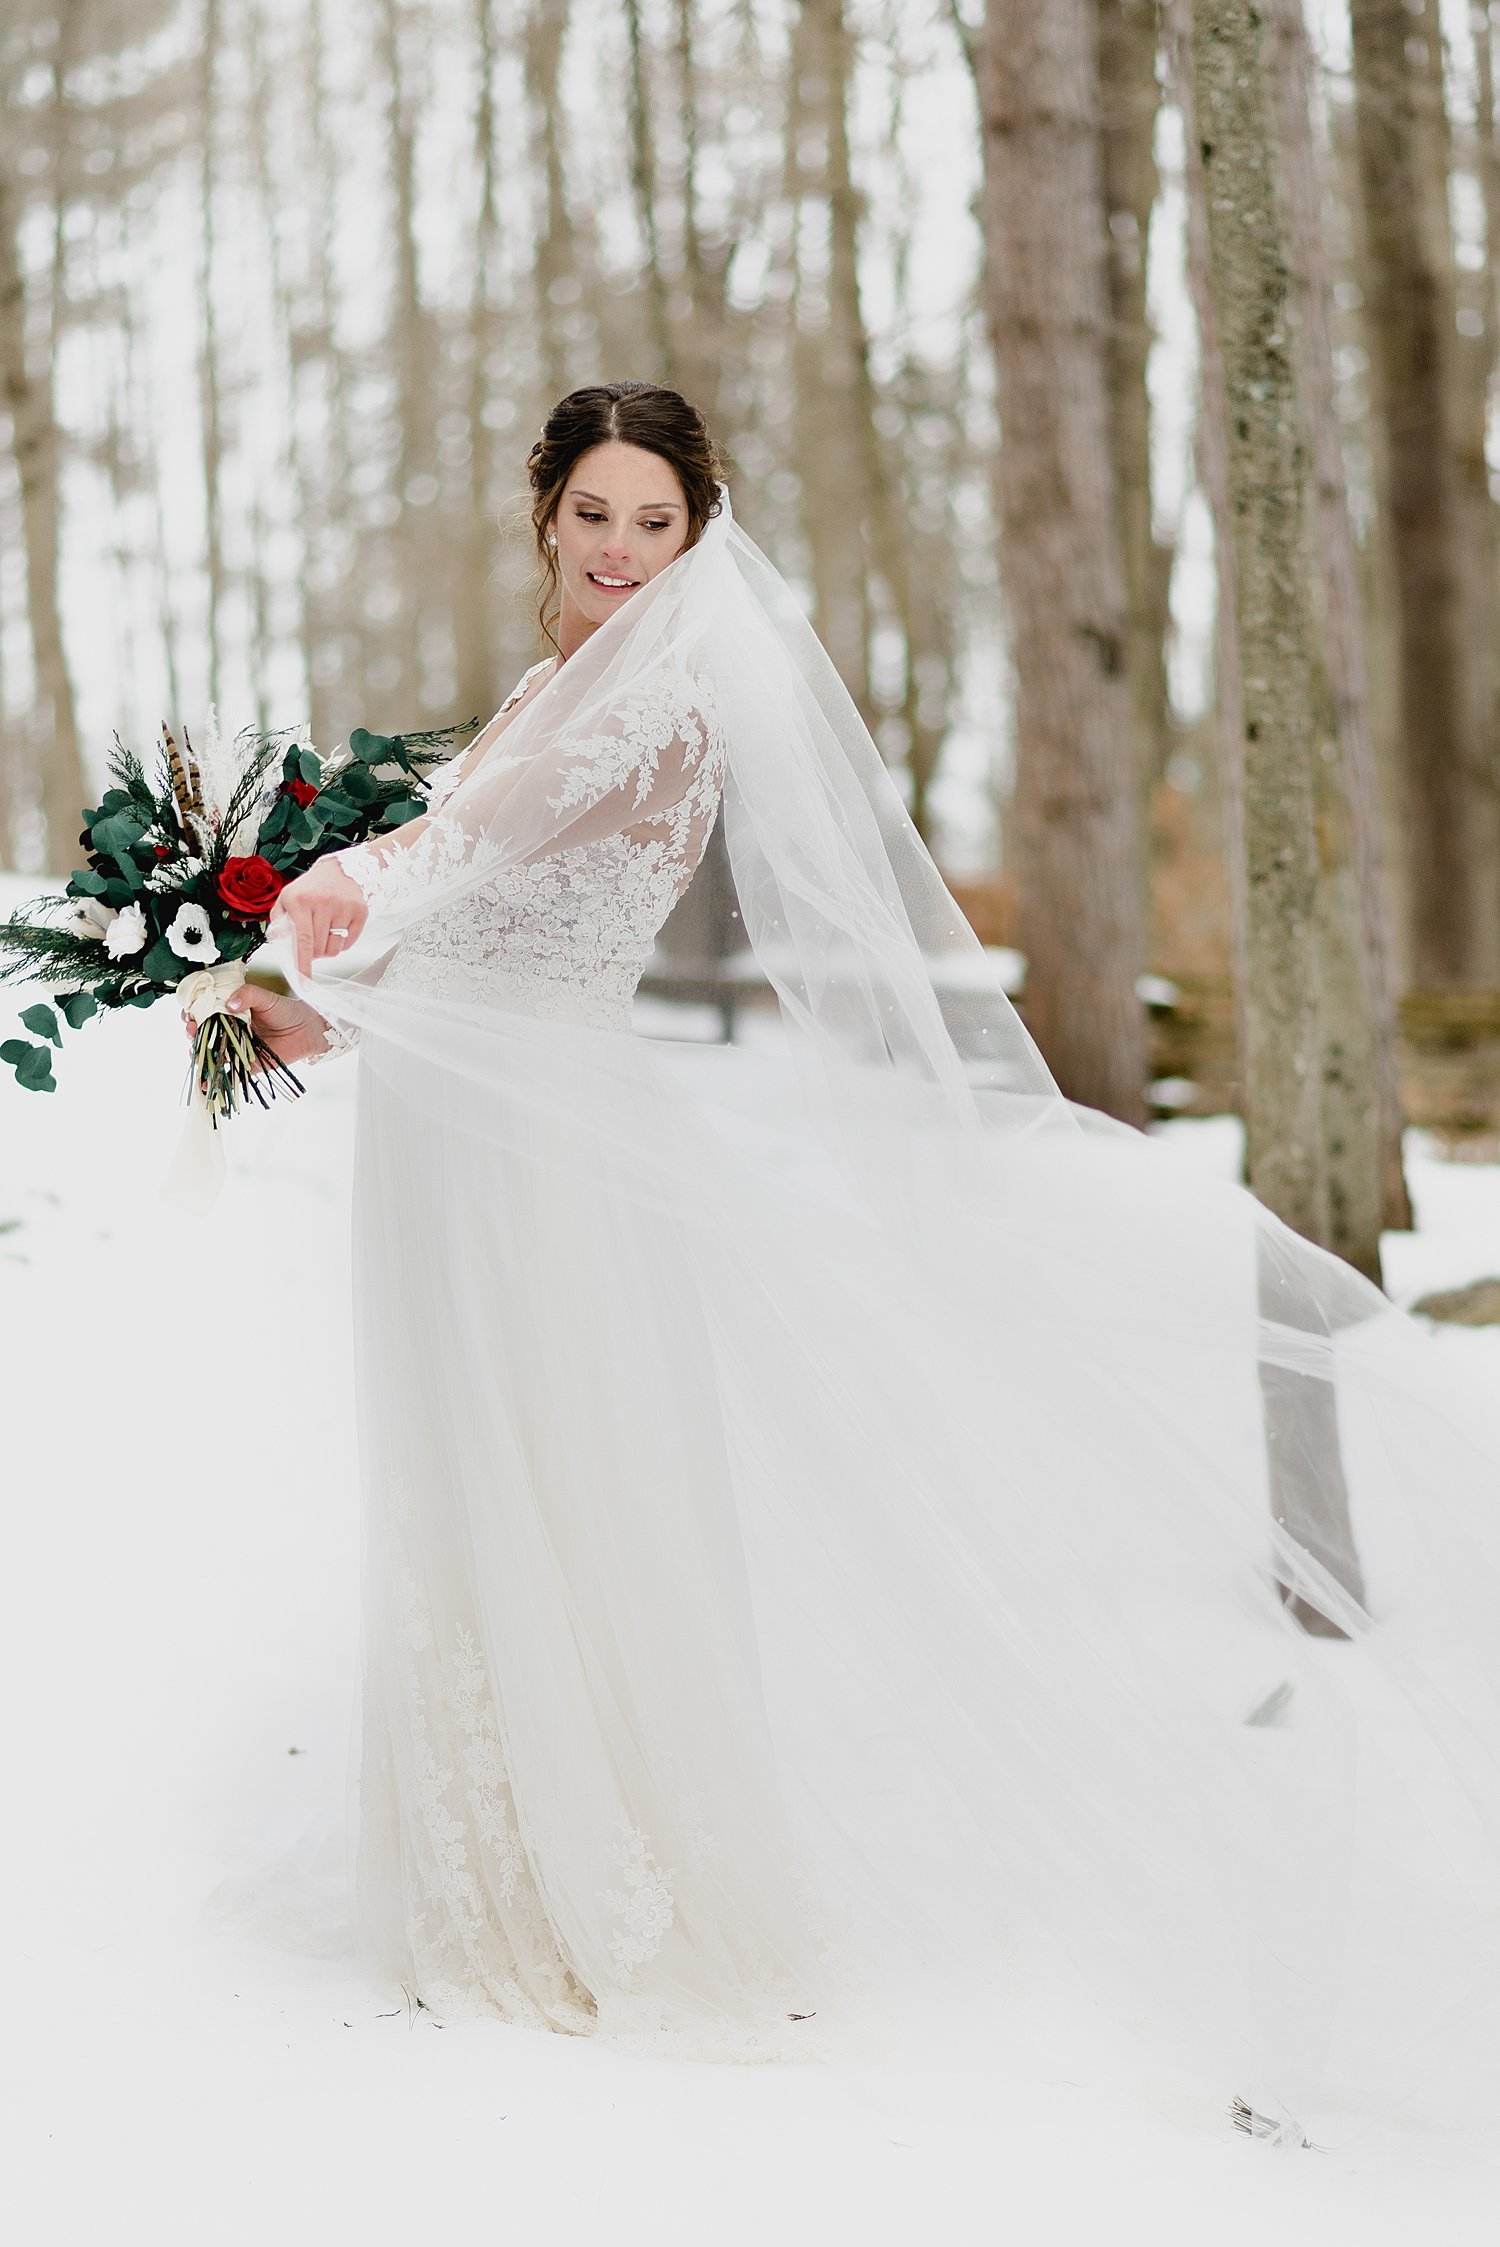 Intimate Winter Elopement at O'Hara Mill Homestead in Madoc, Ontario | Prince Edward County Wedding Photographer | Holly McMurter Photographs_0040.jpg